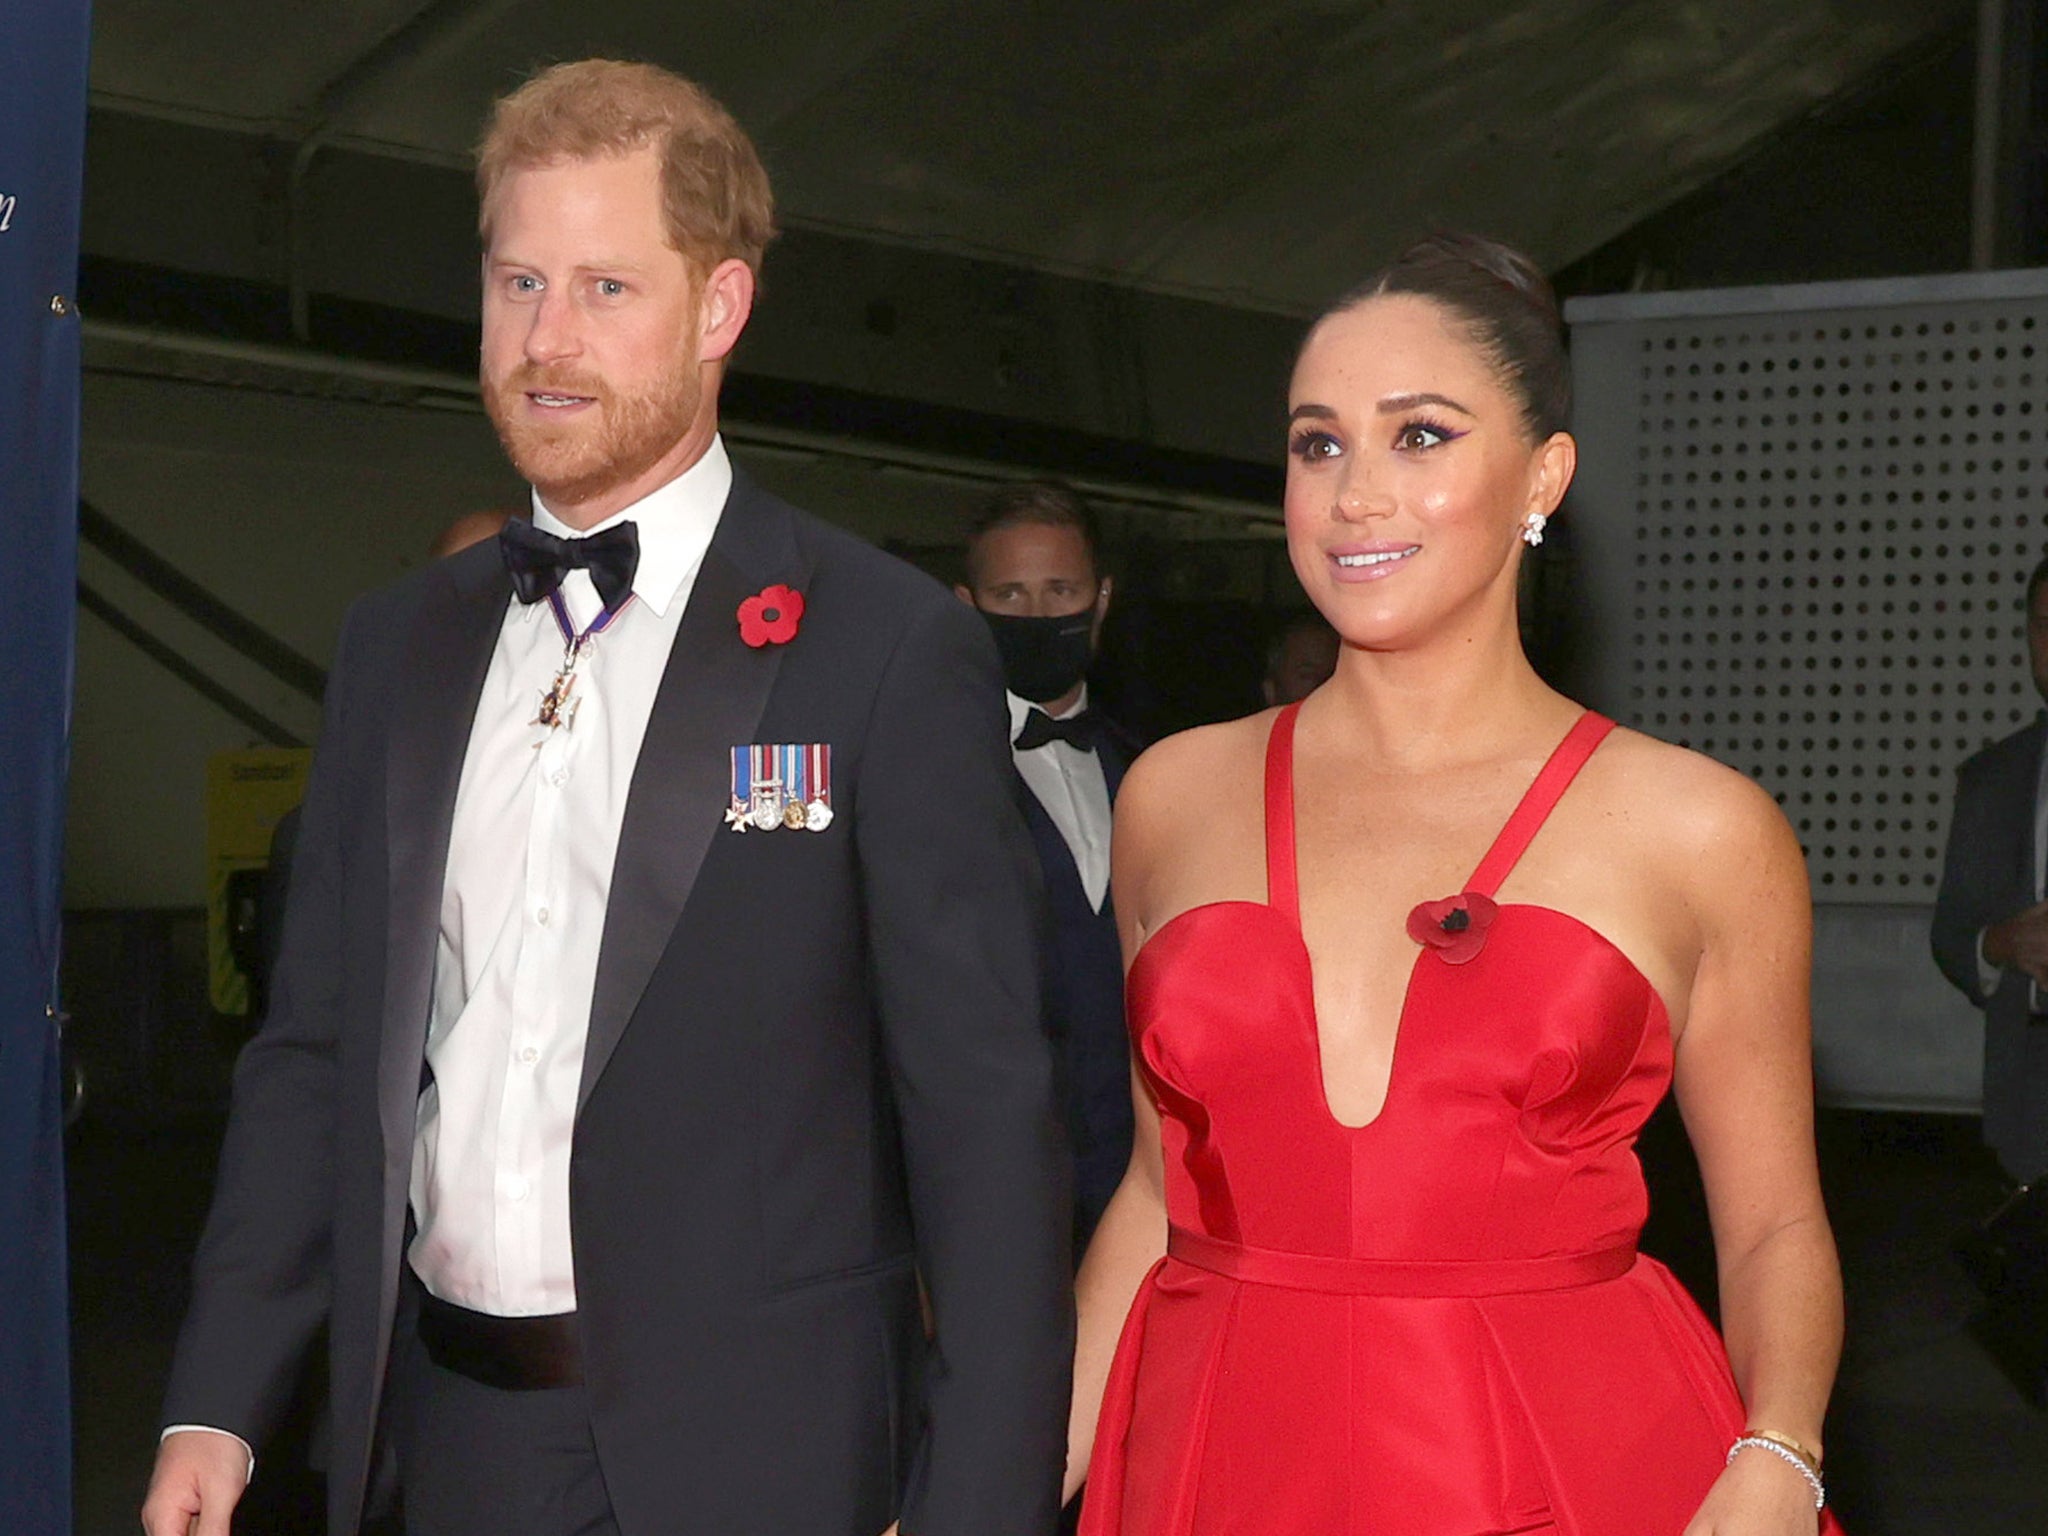 ‘One can understand his personal worries of the Duke and Duchess of Sussex, but it doesn’t entitle them to special access to the services we all depend on’